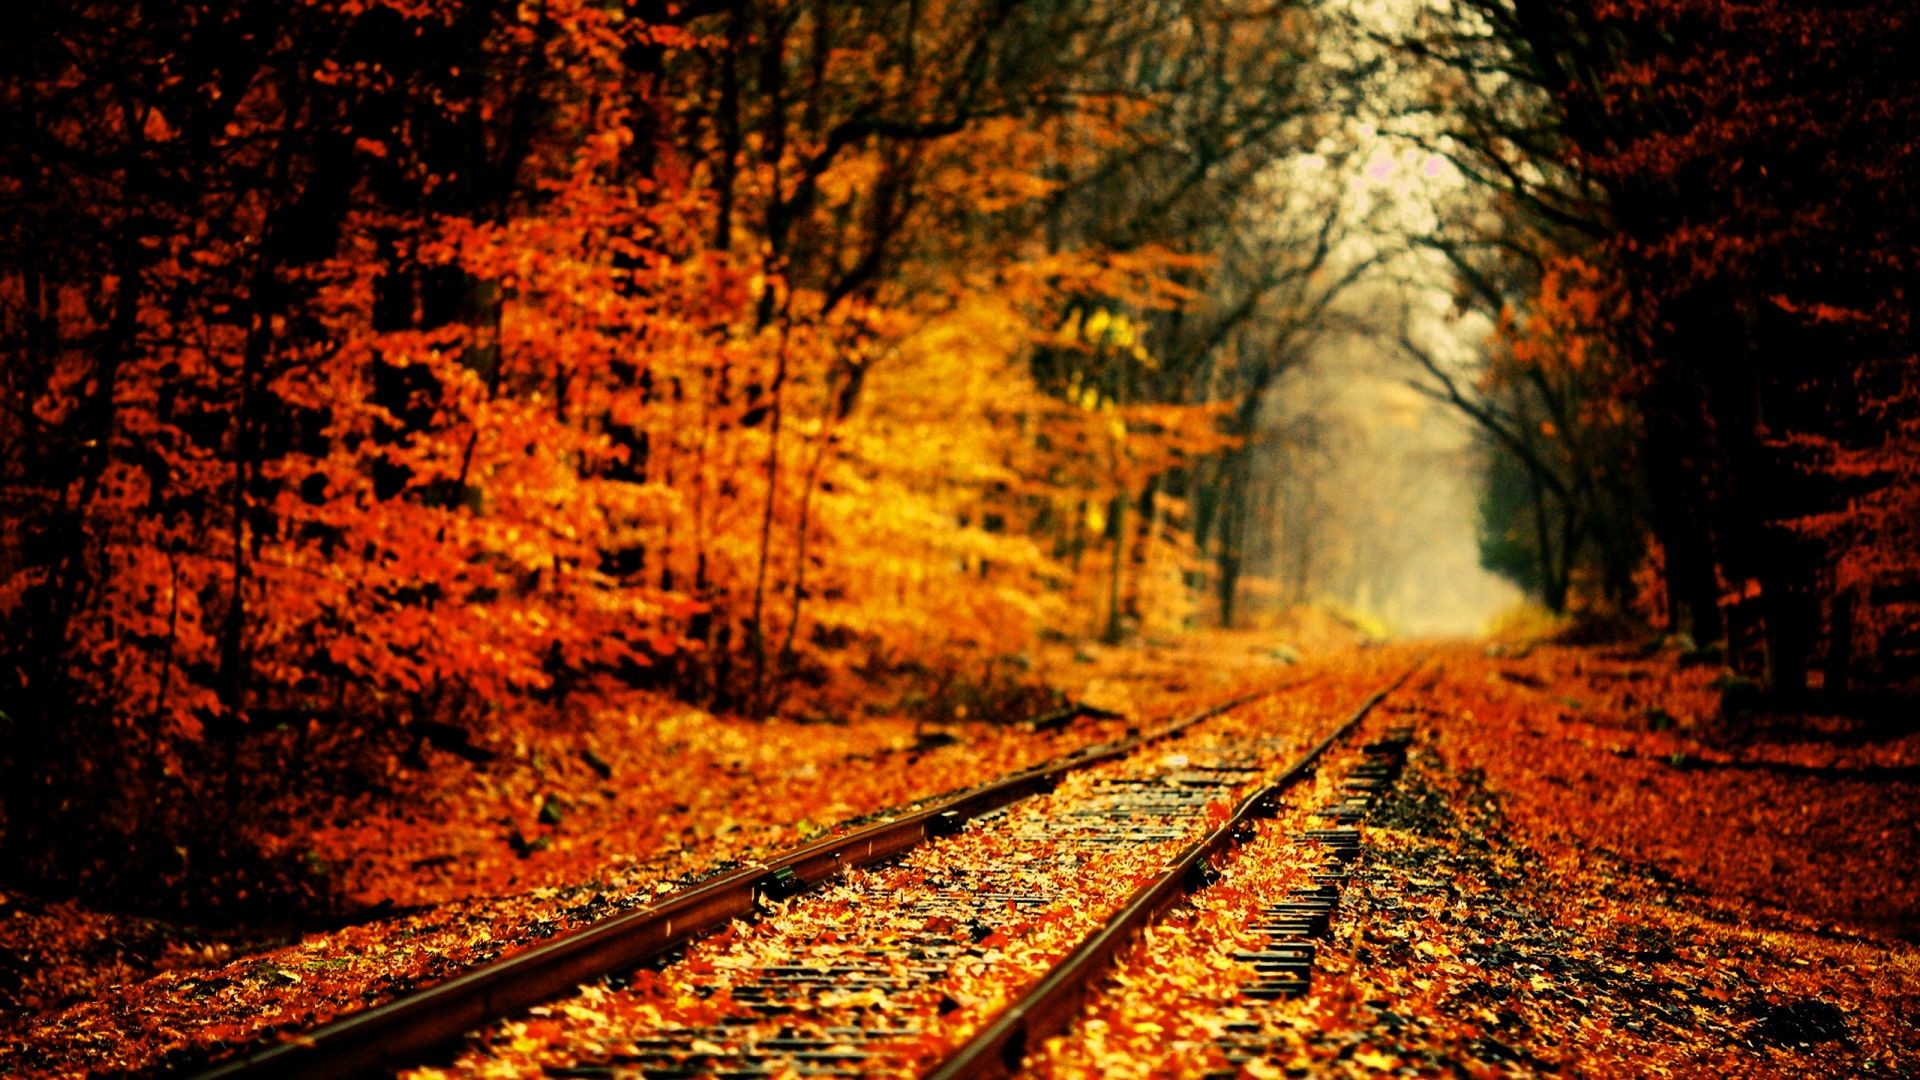 1920x1080 Railway in Autumn wallpaper - Photography wallpapers - #